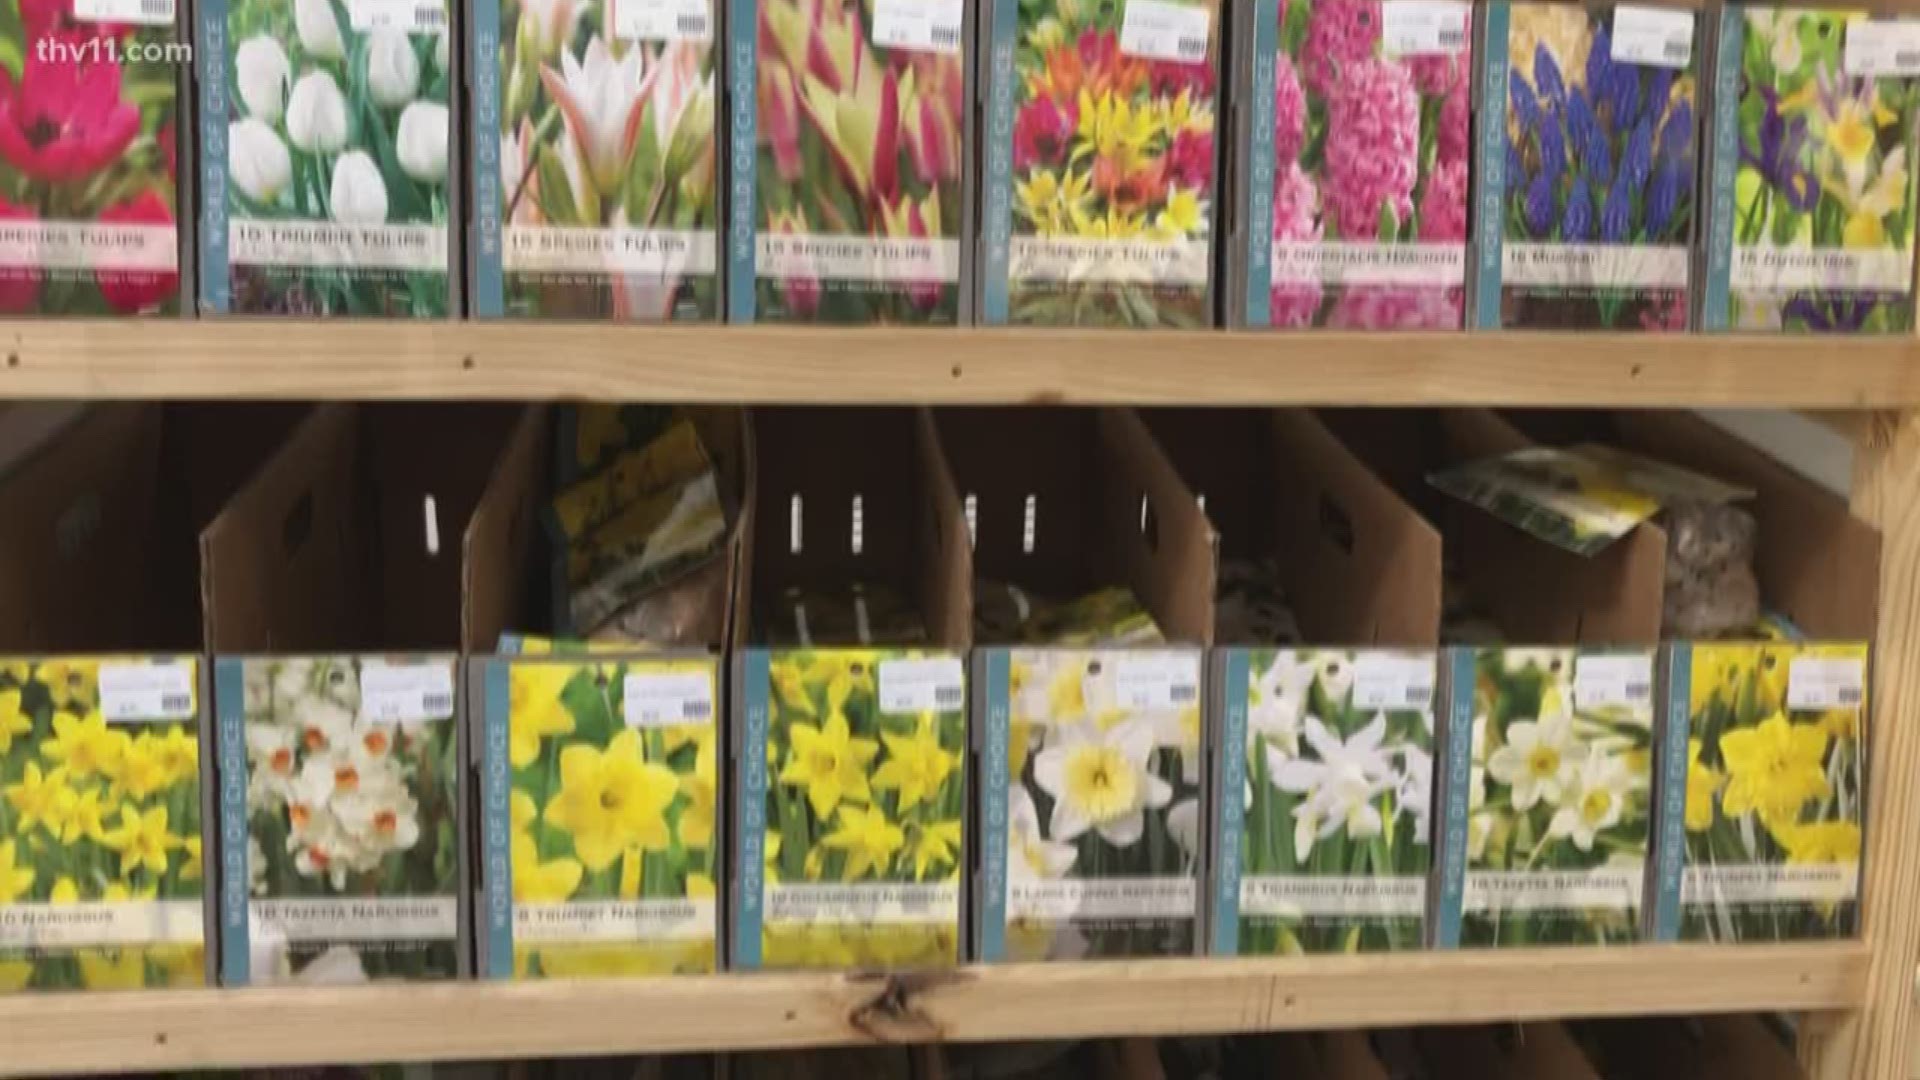 To add some color to your garden in the winter, plant beautiful bulbs. Chris H. Olsen shows us how and when to plant bulbs.